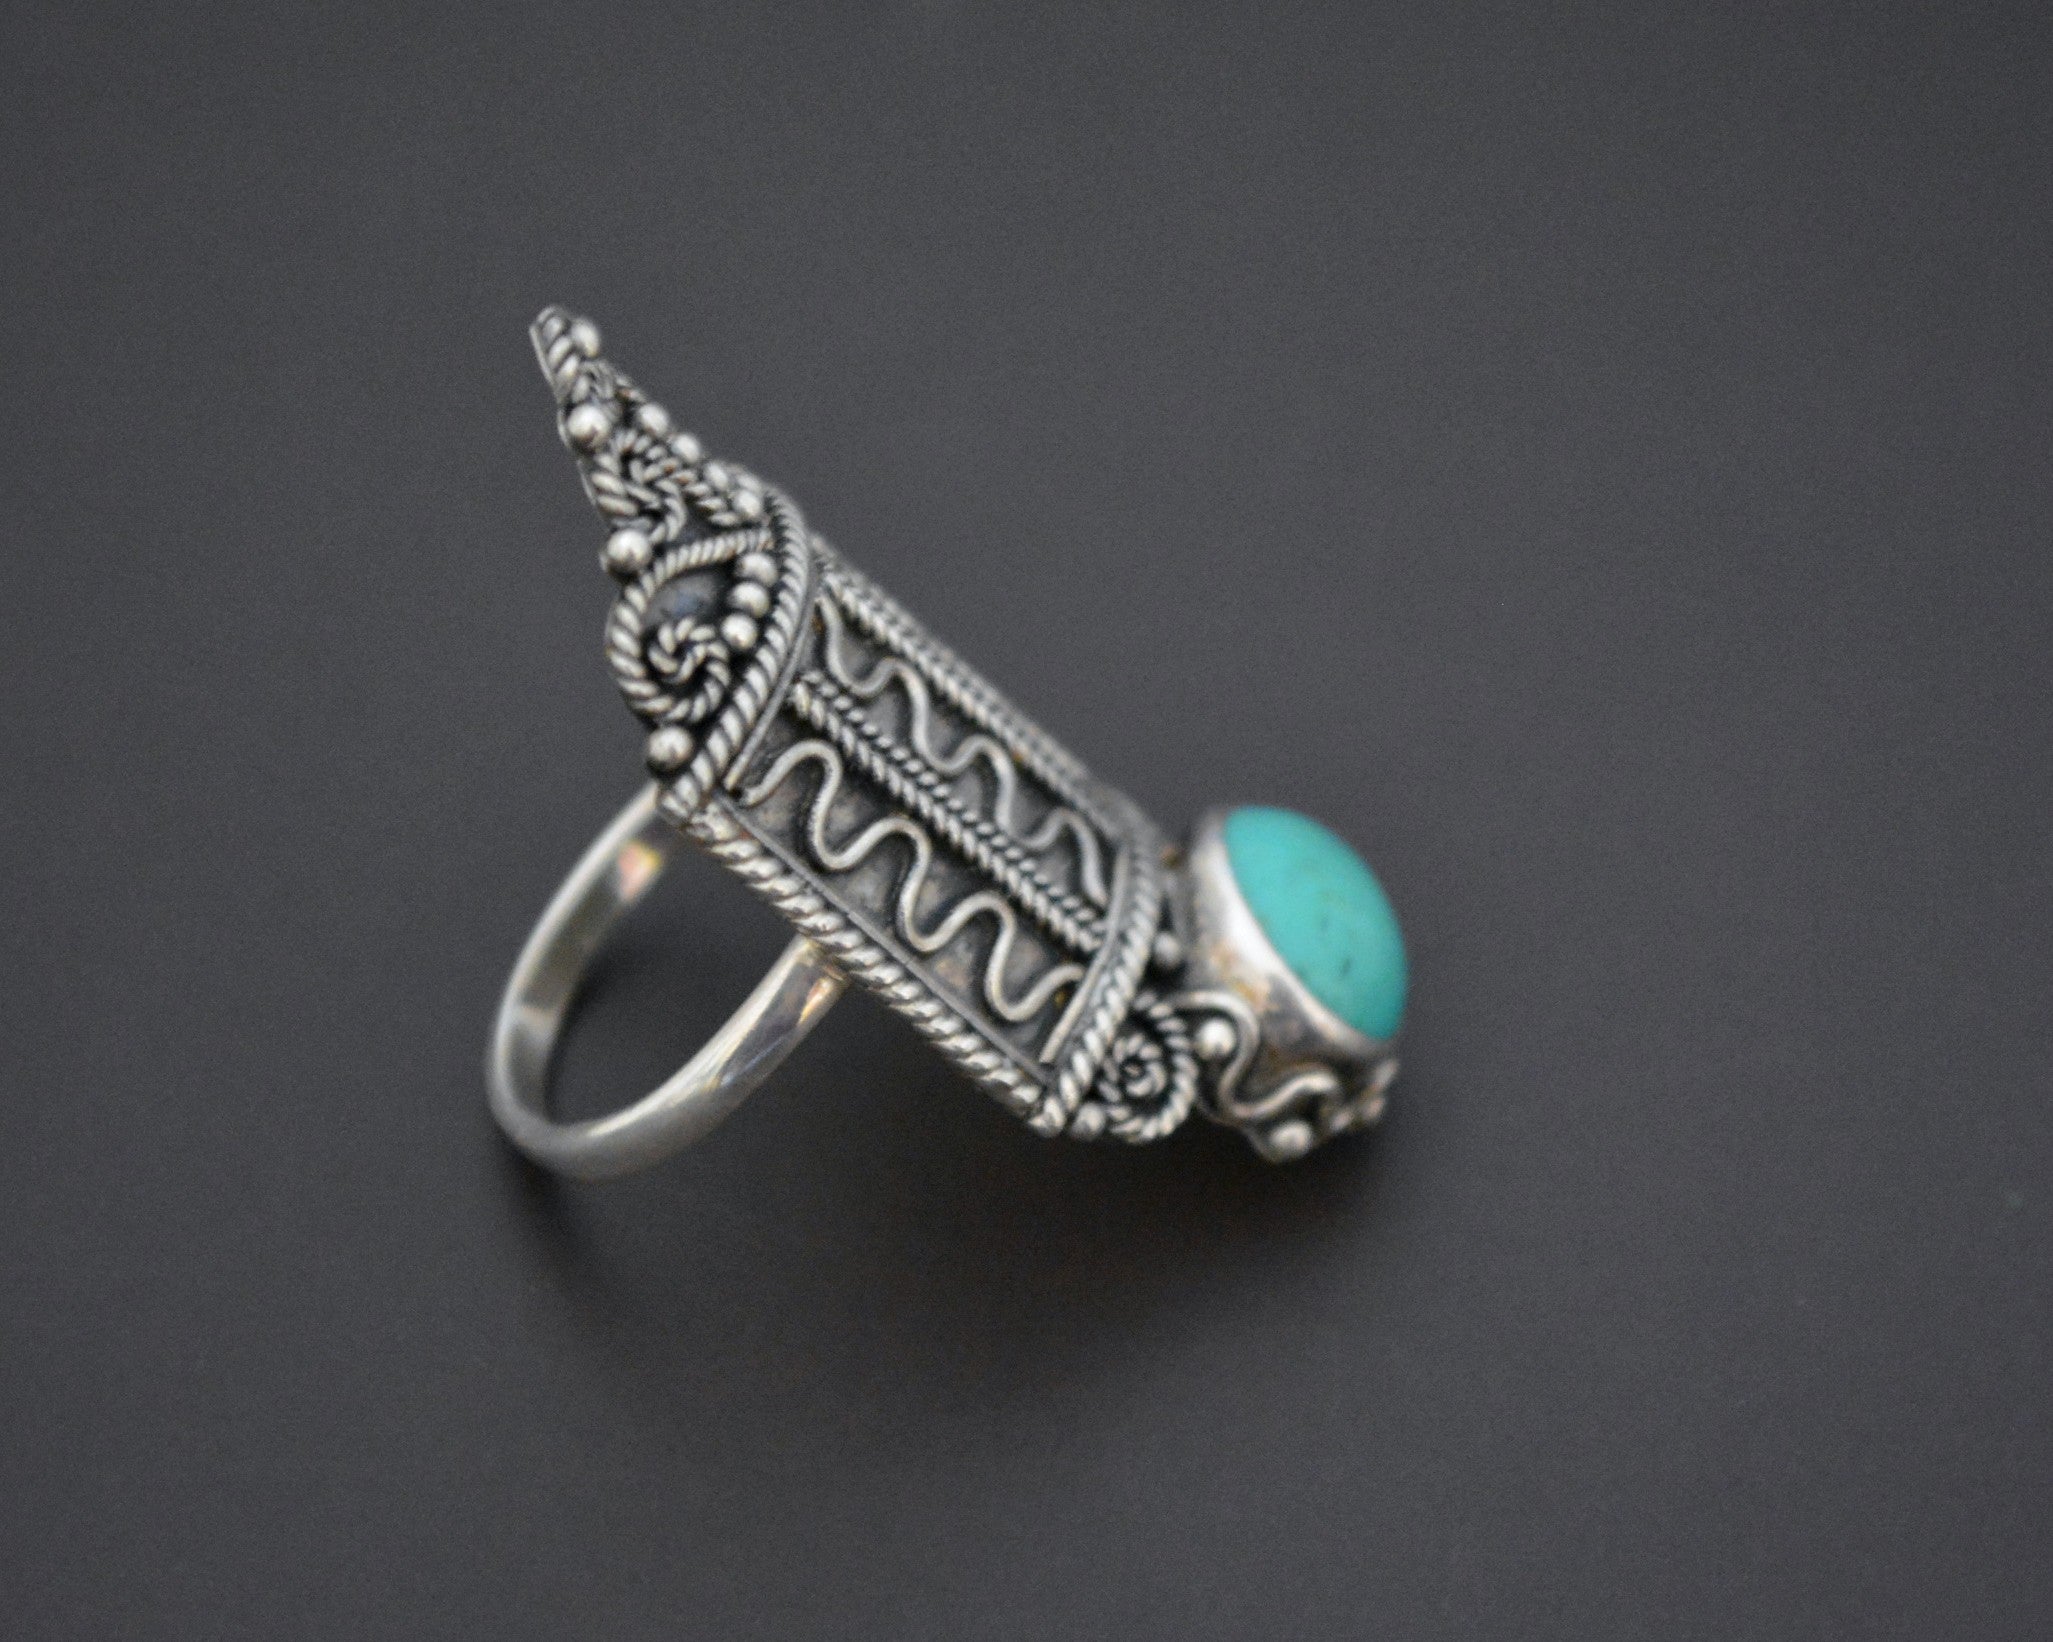 Ethnic Turquoise Ring from Bali - Size 8